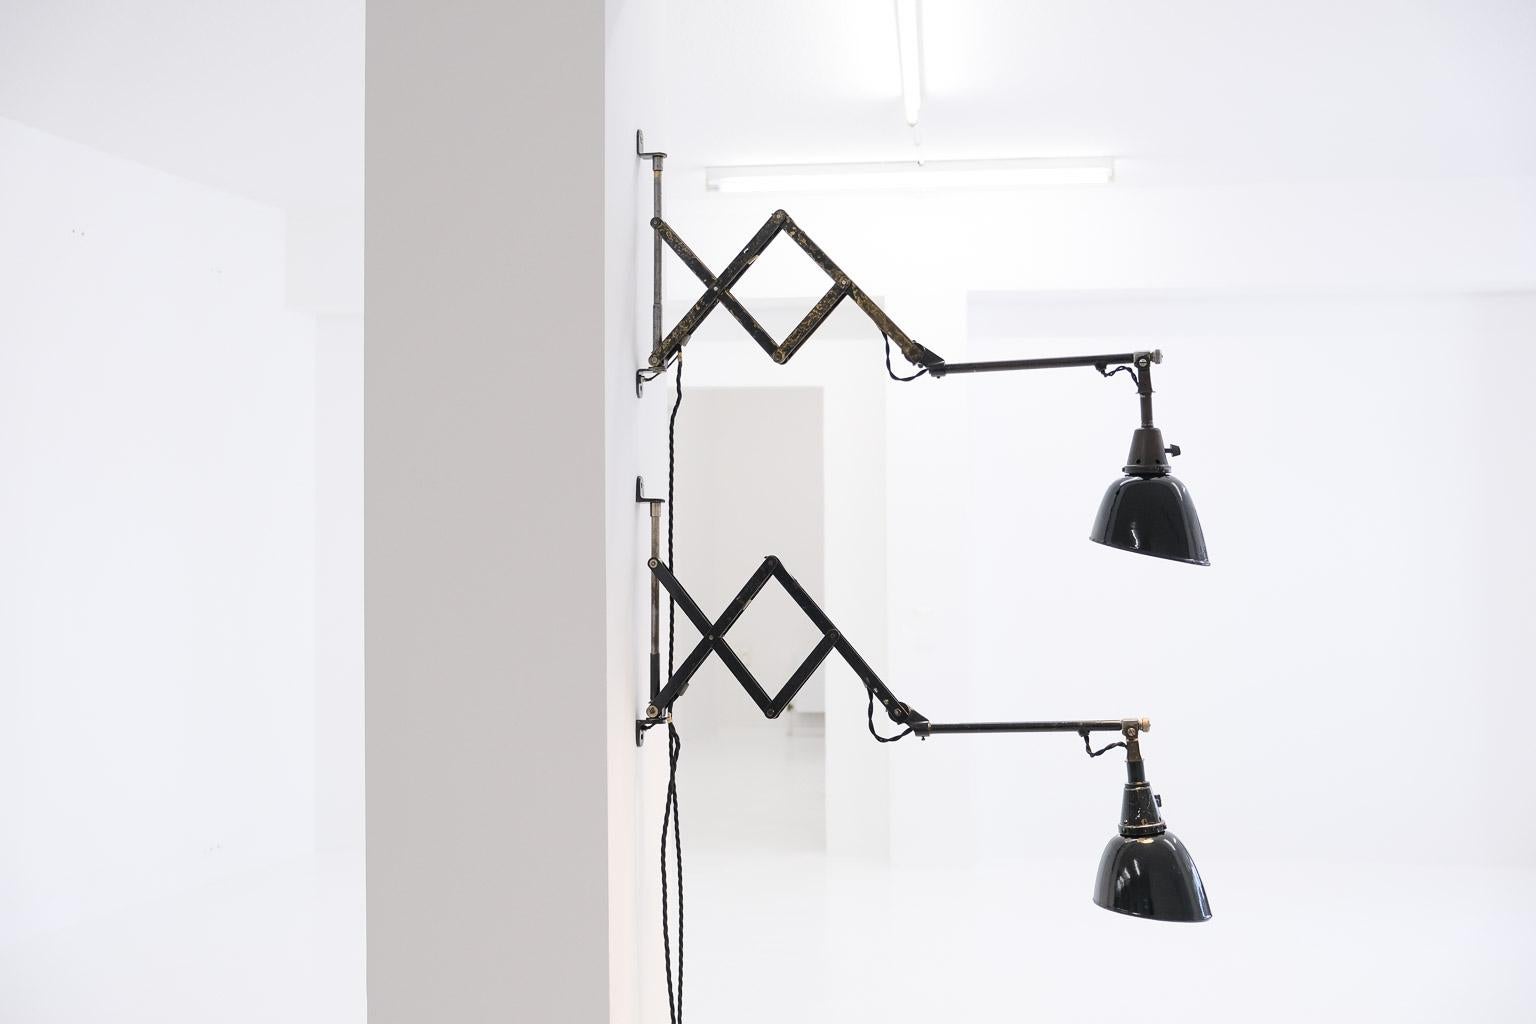 An impressive set of 2 Midgard wall scissor lights, an early version of model 110. Each wall mounted lamp has a length of 116 cm in total. The light can be moved to almost any position at a 180-degree angle. The lamps were lovingly restored in our